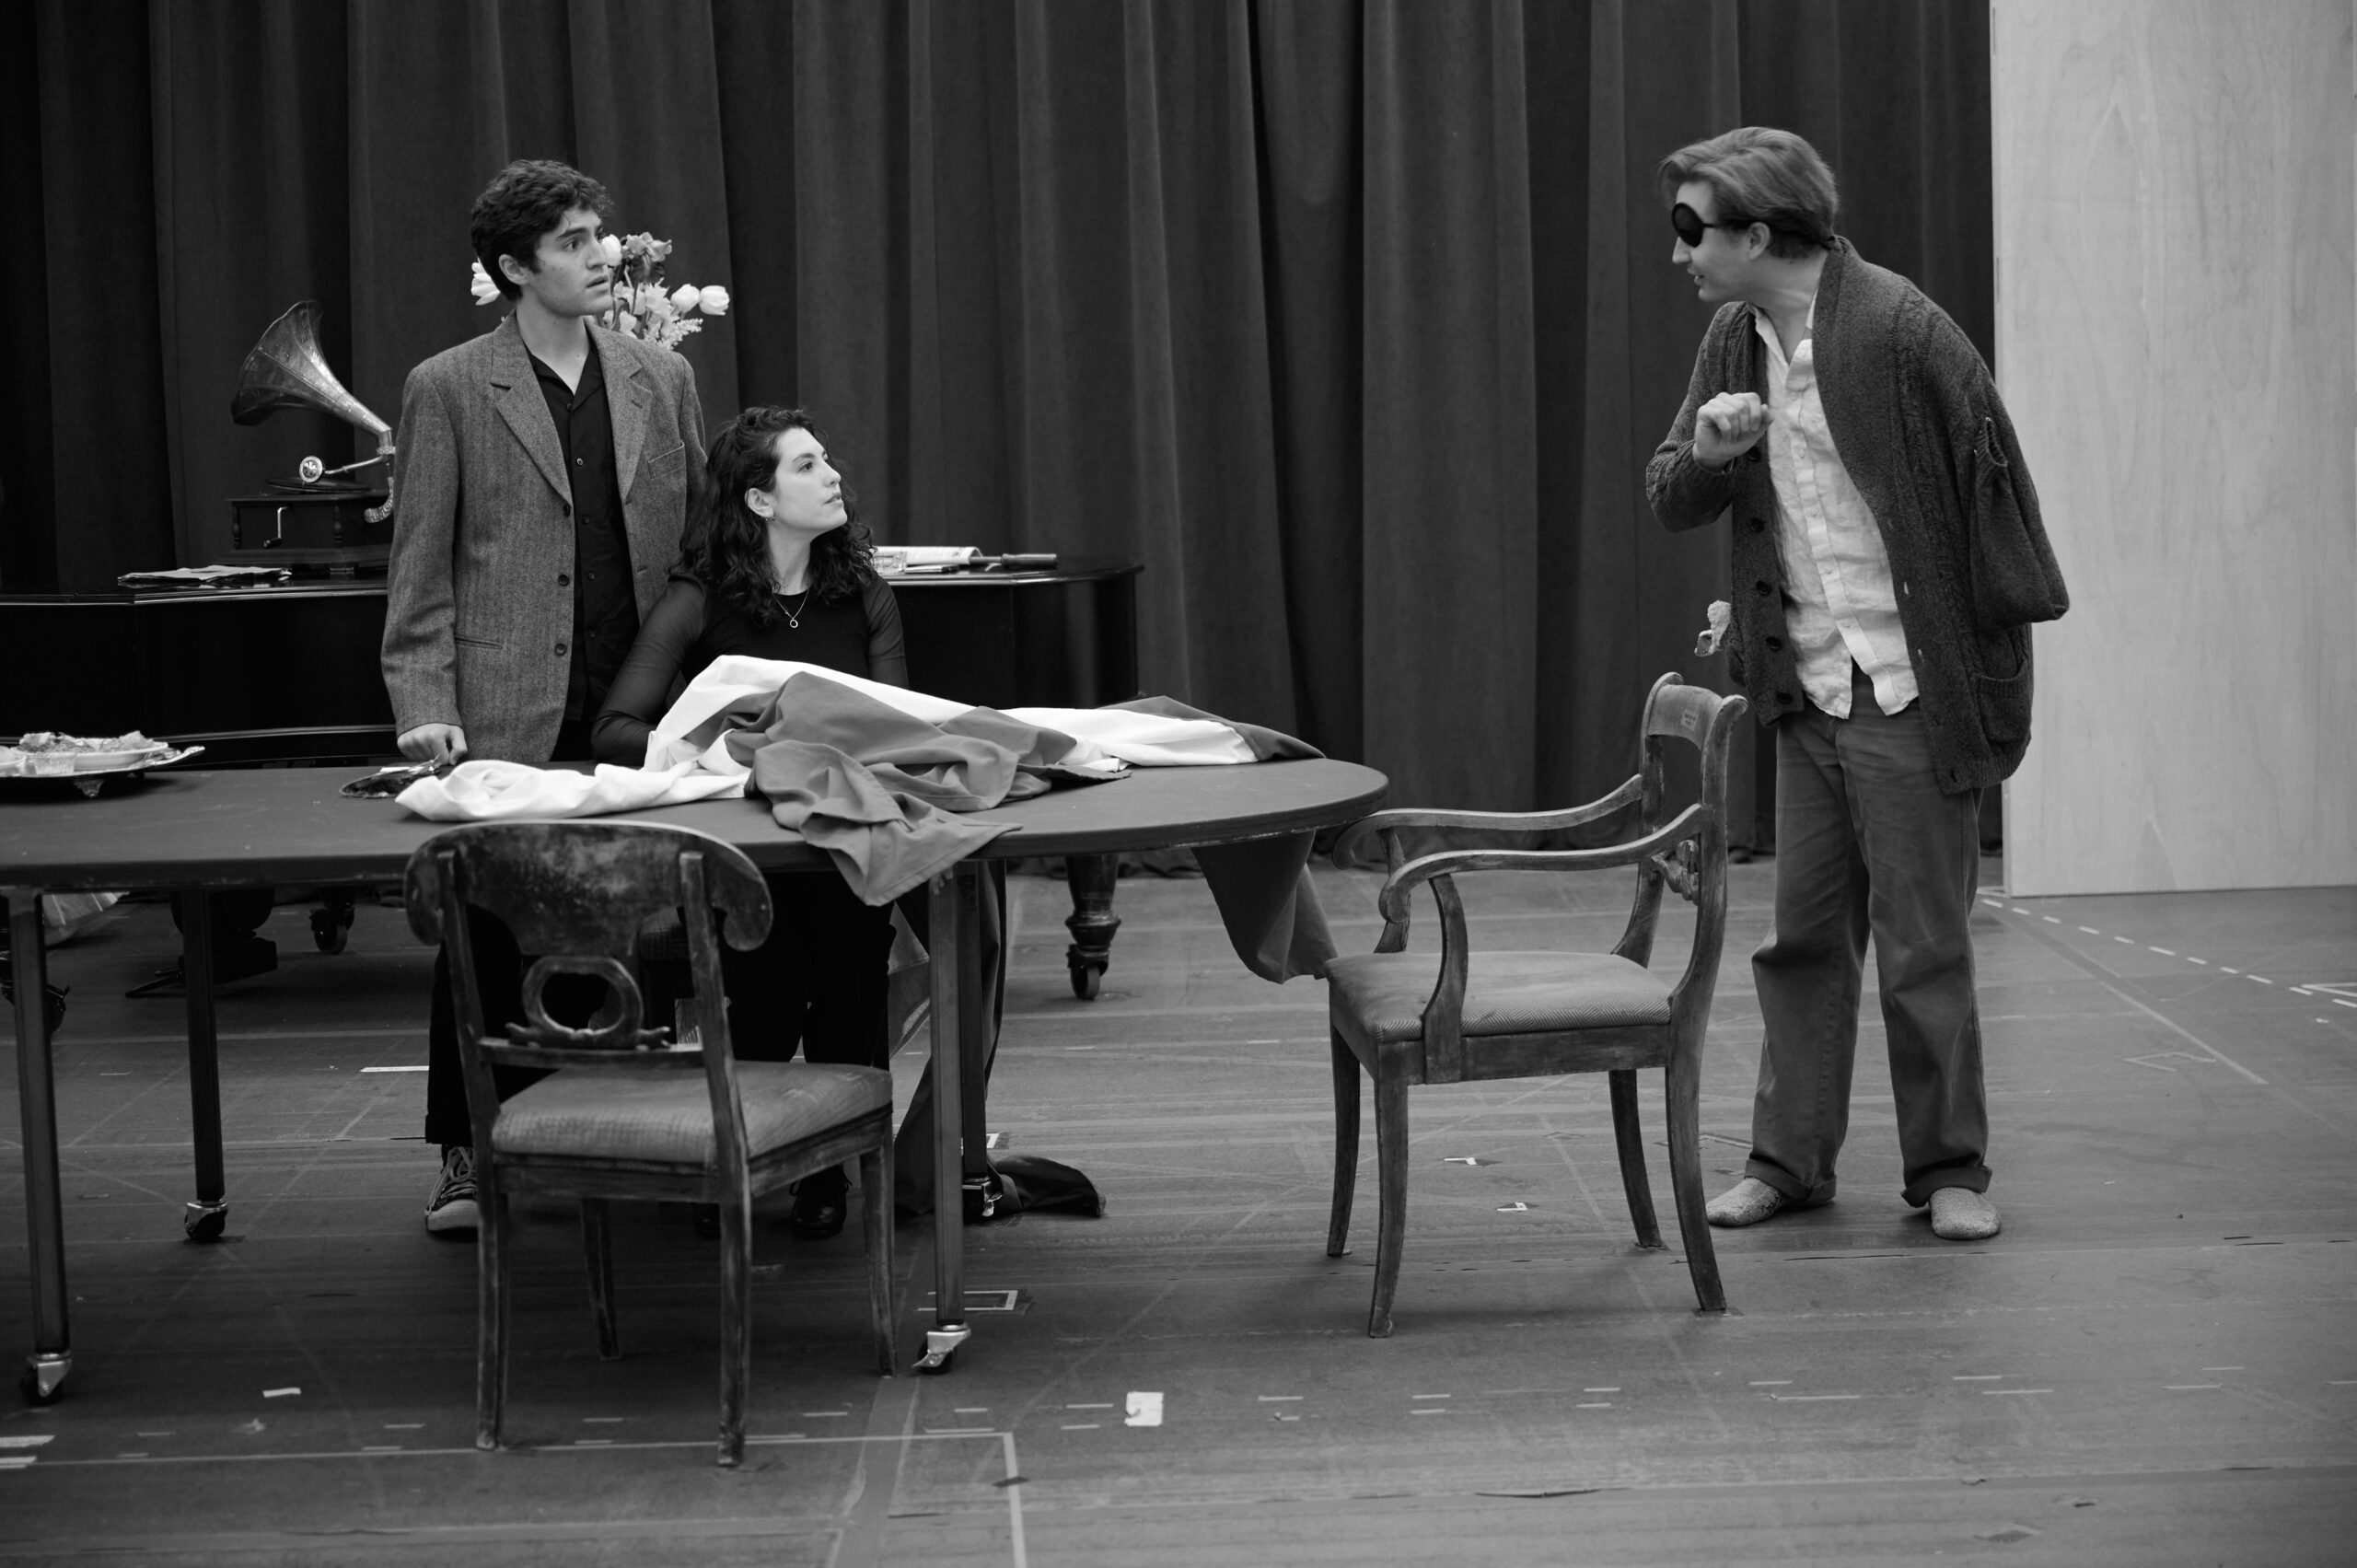 Jesse Aaronson, Tedra Millan, and Seth Numrich in rehearsals for Leopoldstadt. Photo by Jenny Anderson.